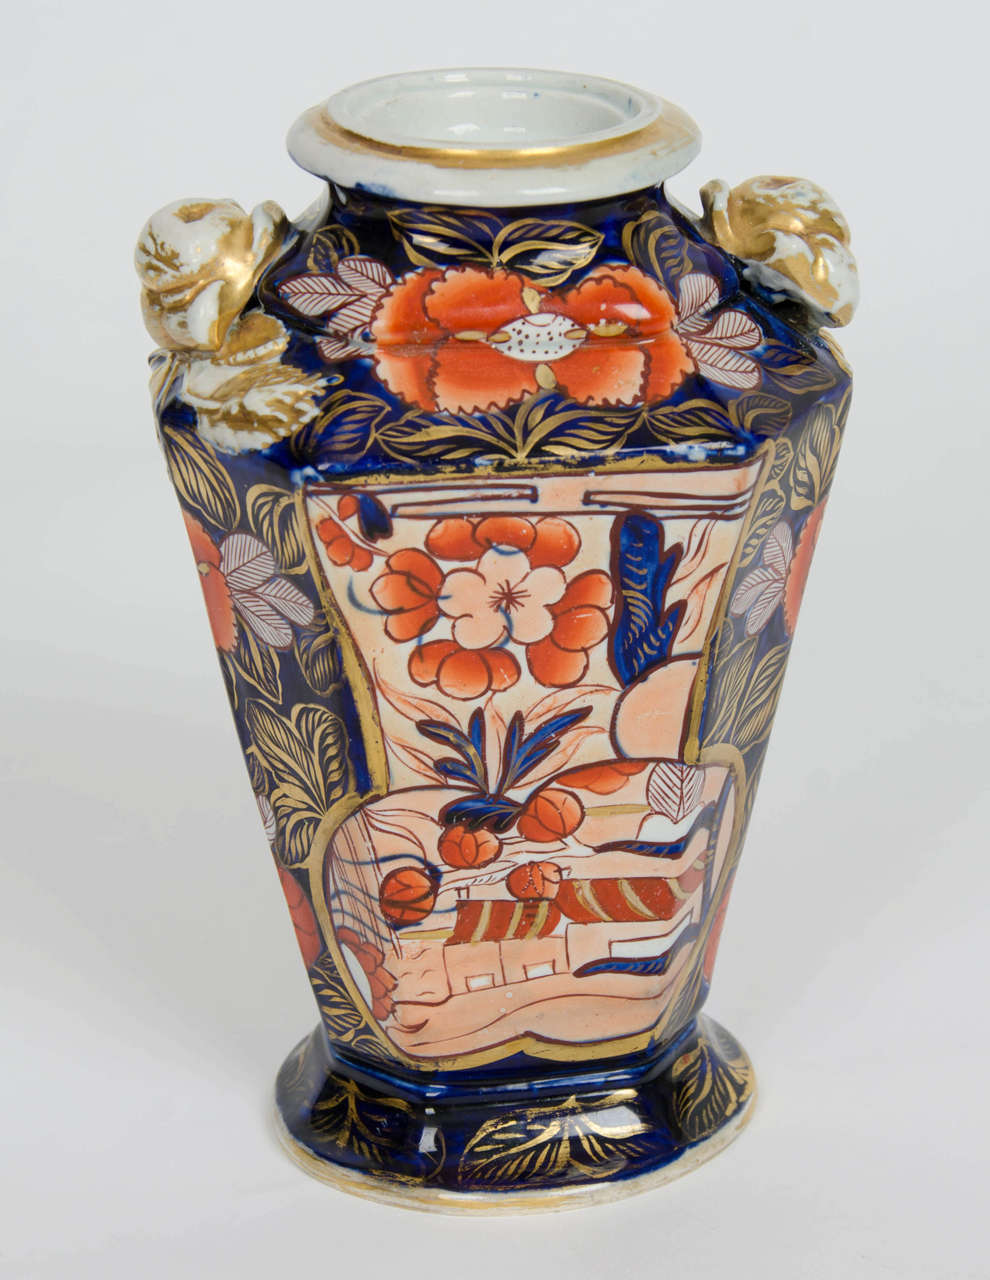 This is a rare ironstone vase, in a very sought after pattern, made by the Mason's factory in the early 19th century.

The vase has a good tapering octagonal profile with two Rose handles at the shoulder. The vase is decorated in the highly